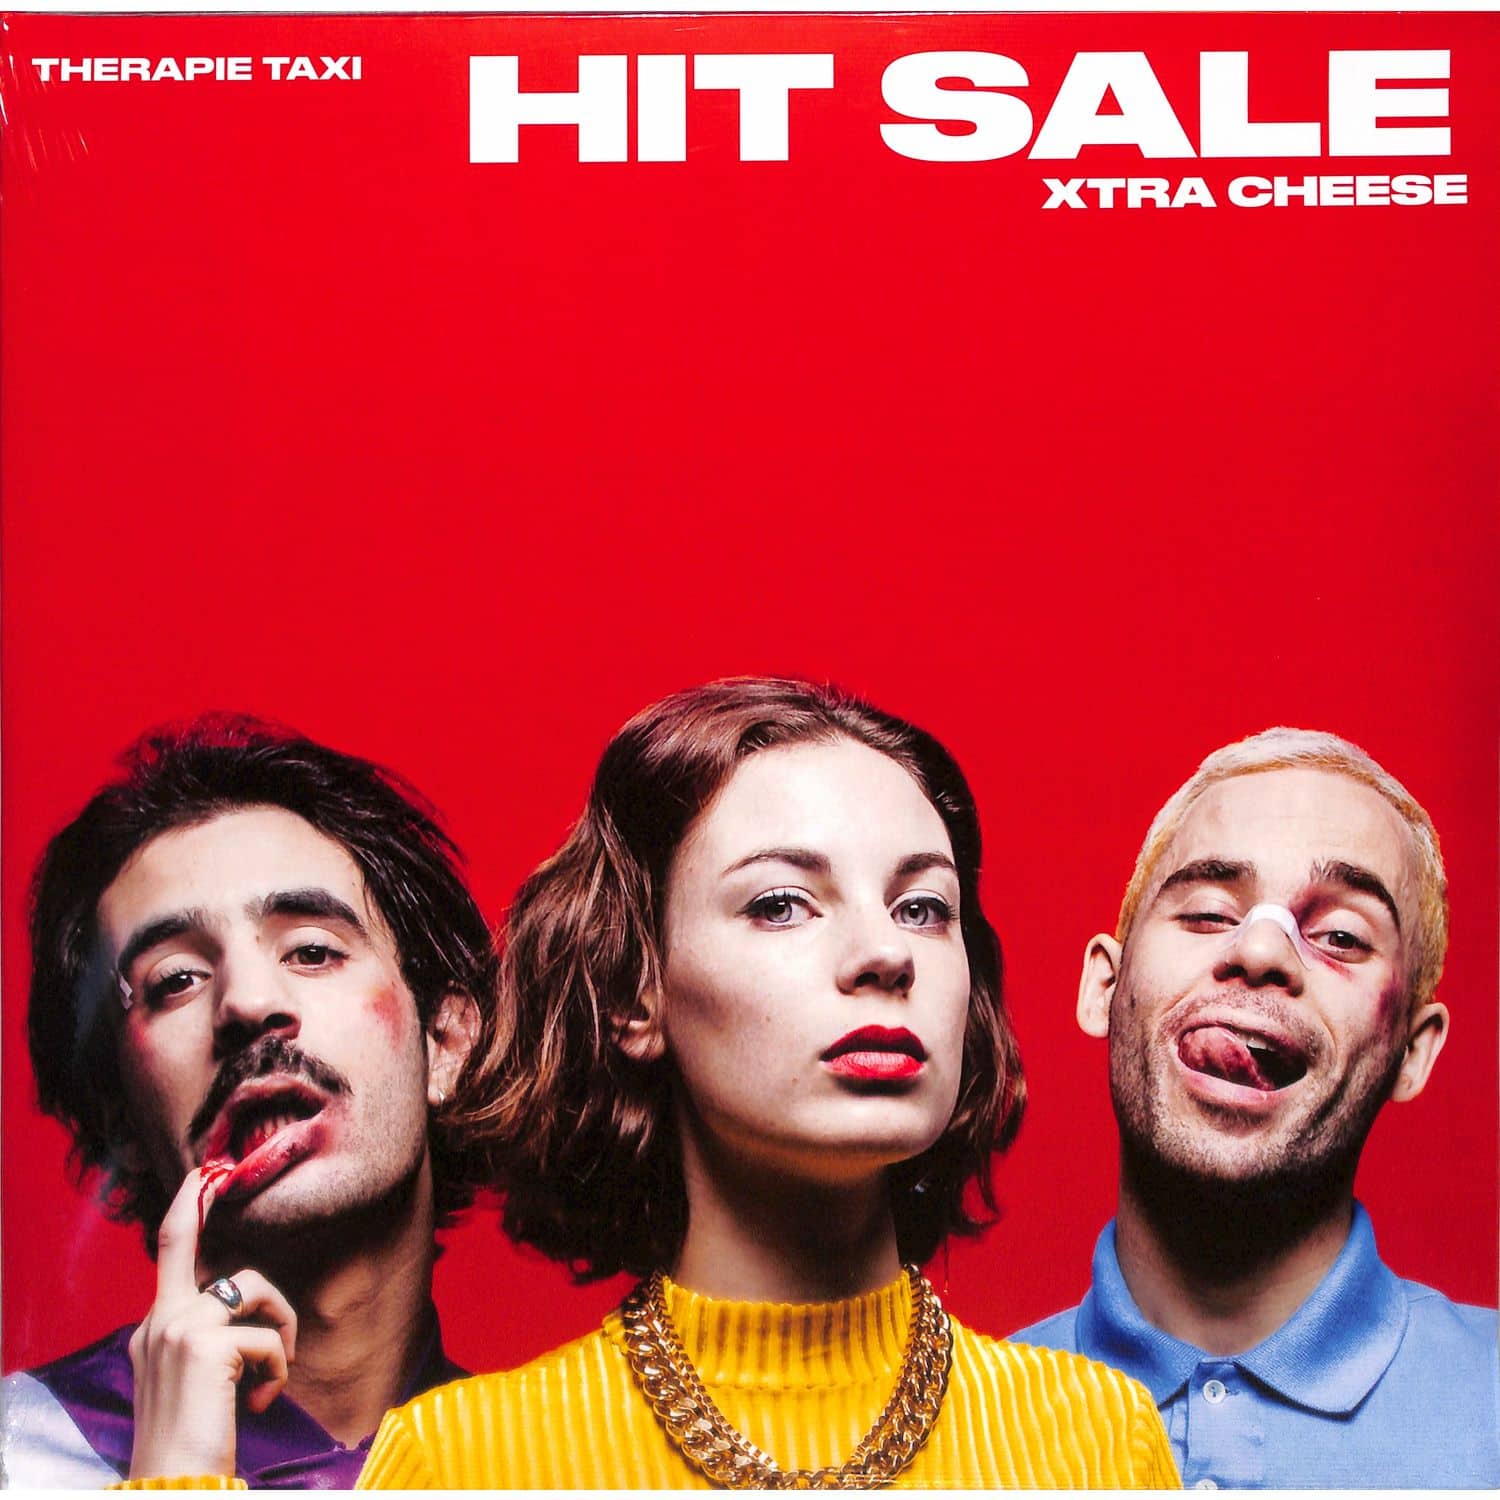 Therapie Taxi - HIT SALE 